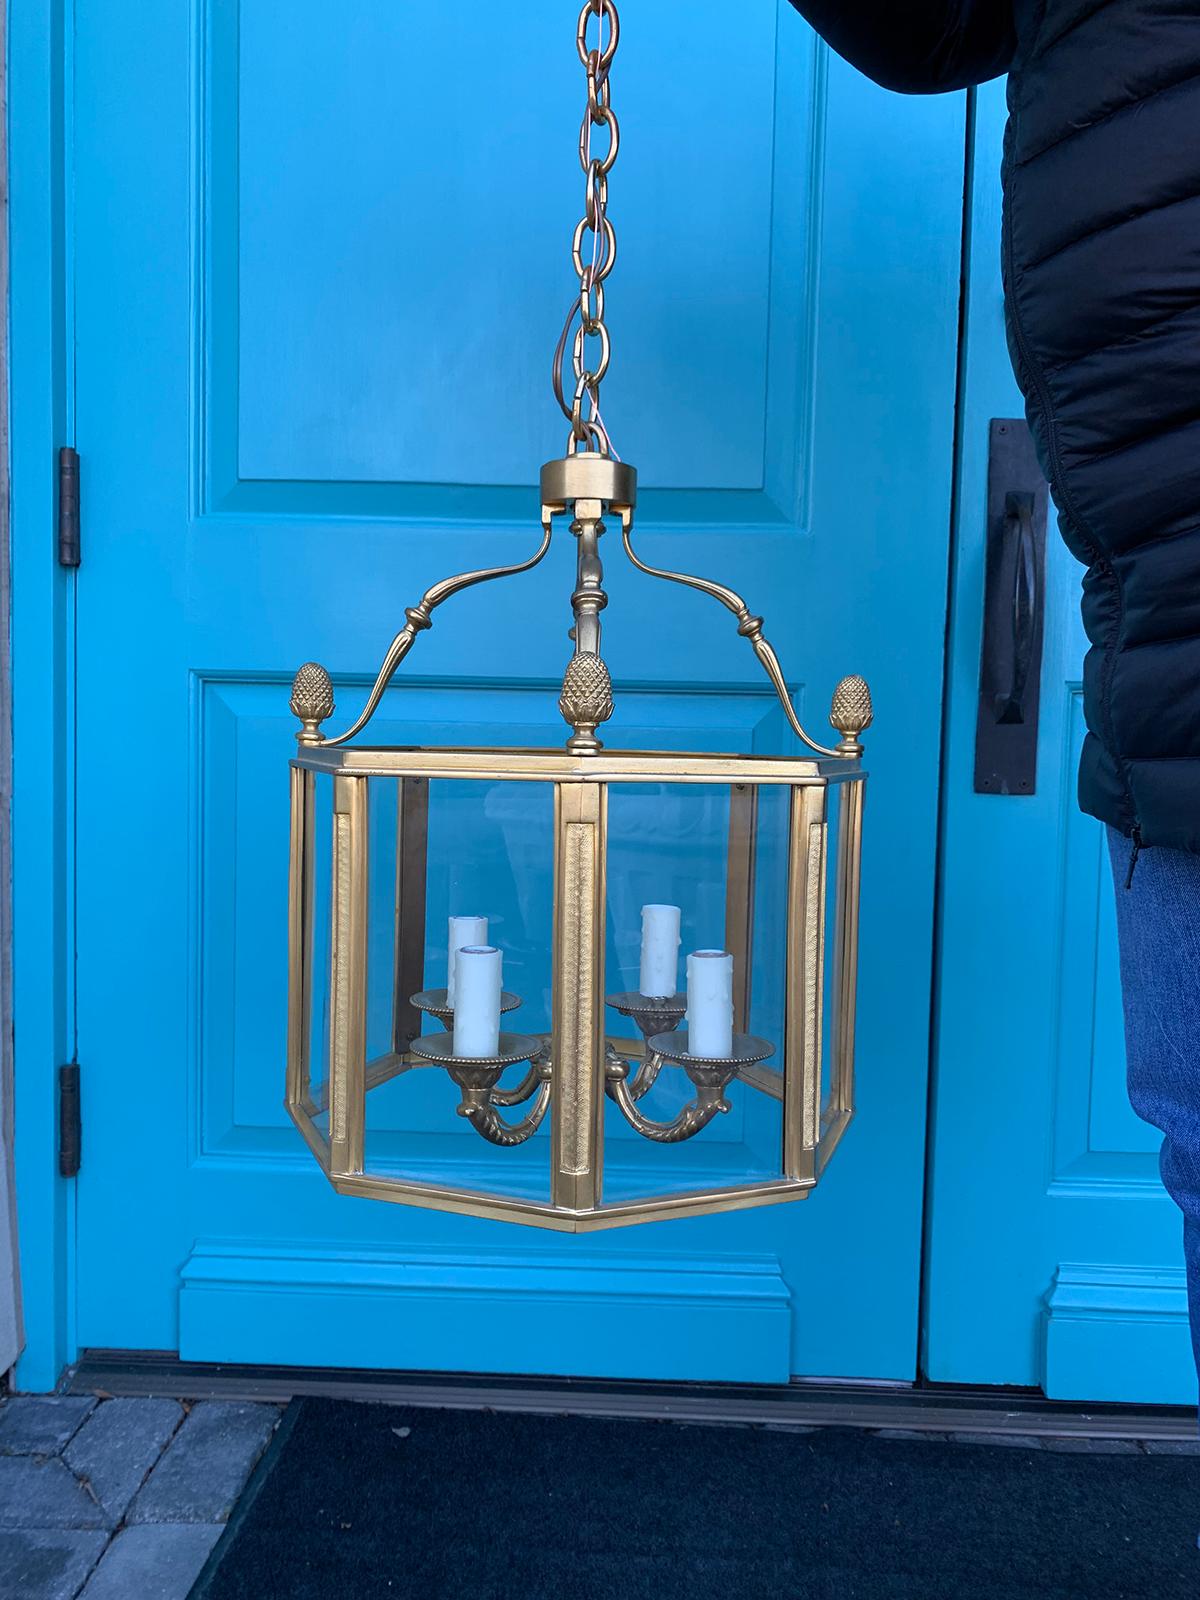 20th century gilt bronze Louis XVI style octagonal four-light lantern
Brand new wiring
Please note the glass is clear - turquoise showing is of our front door.